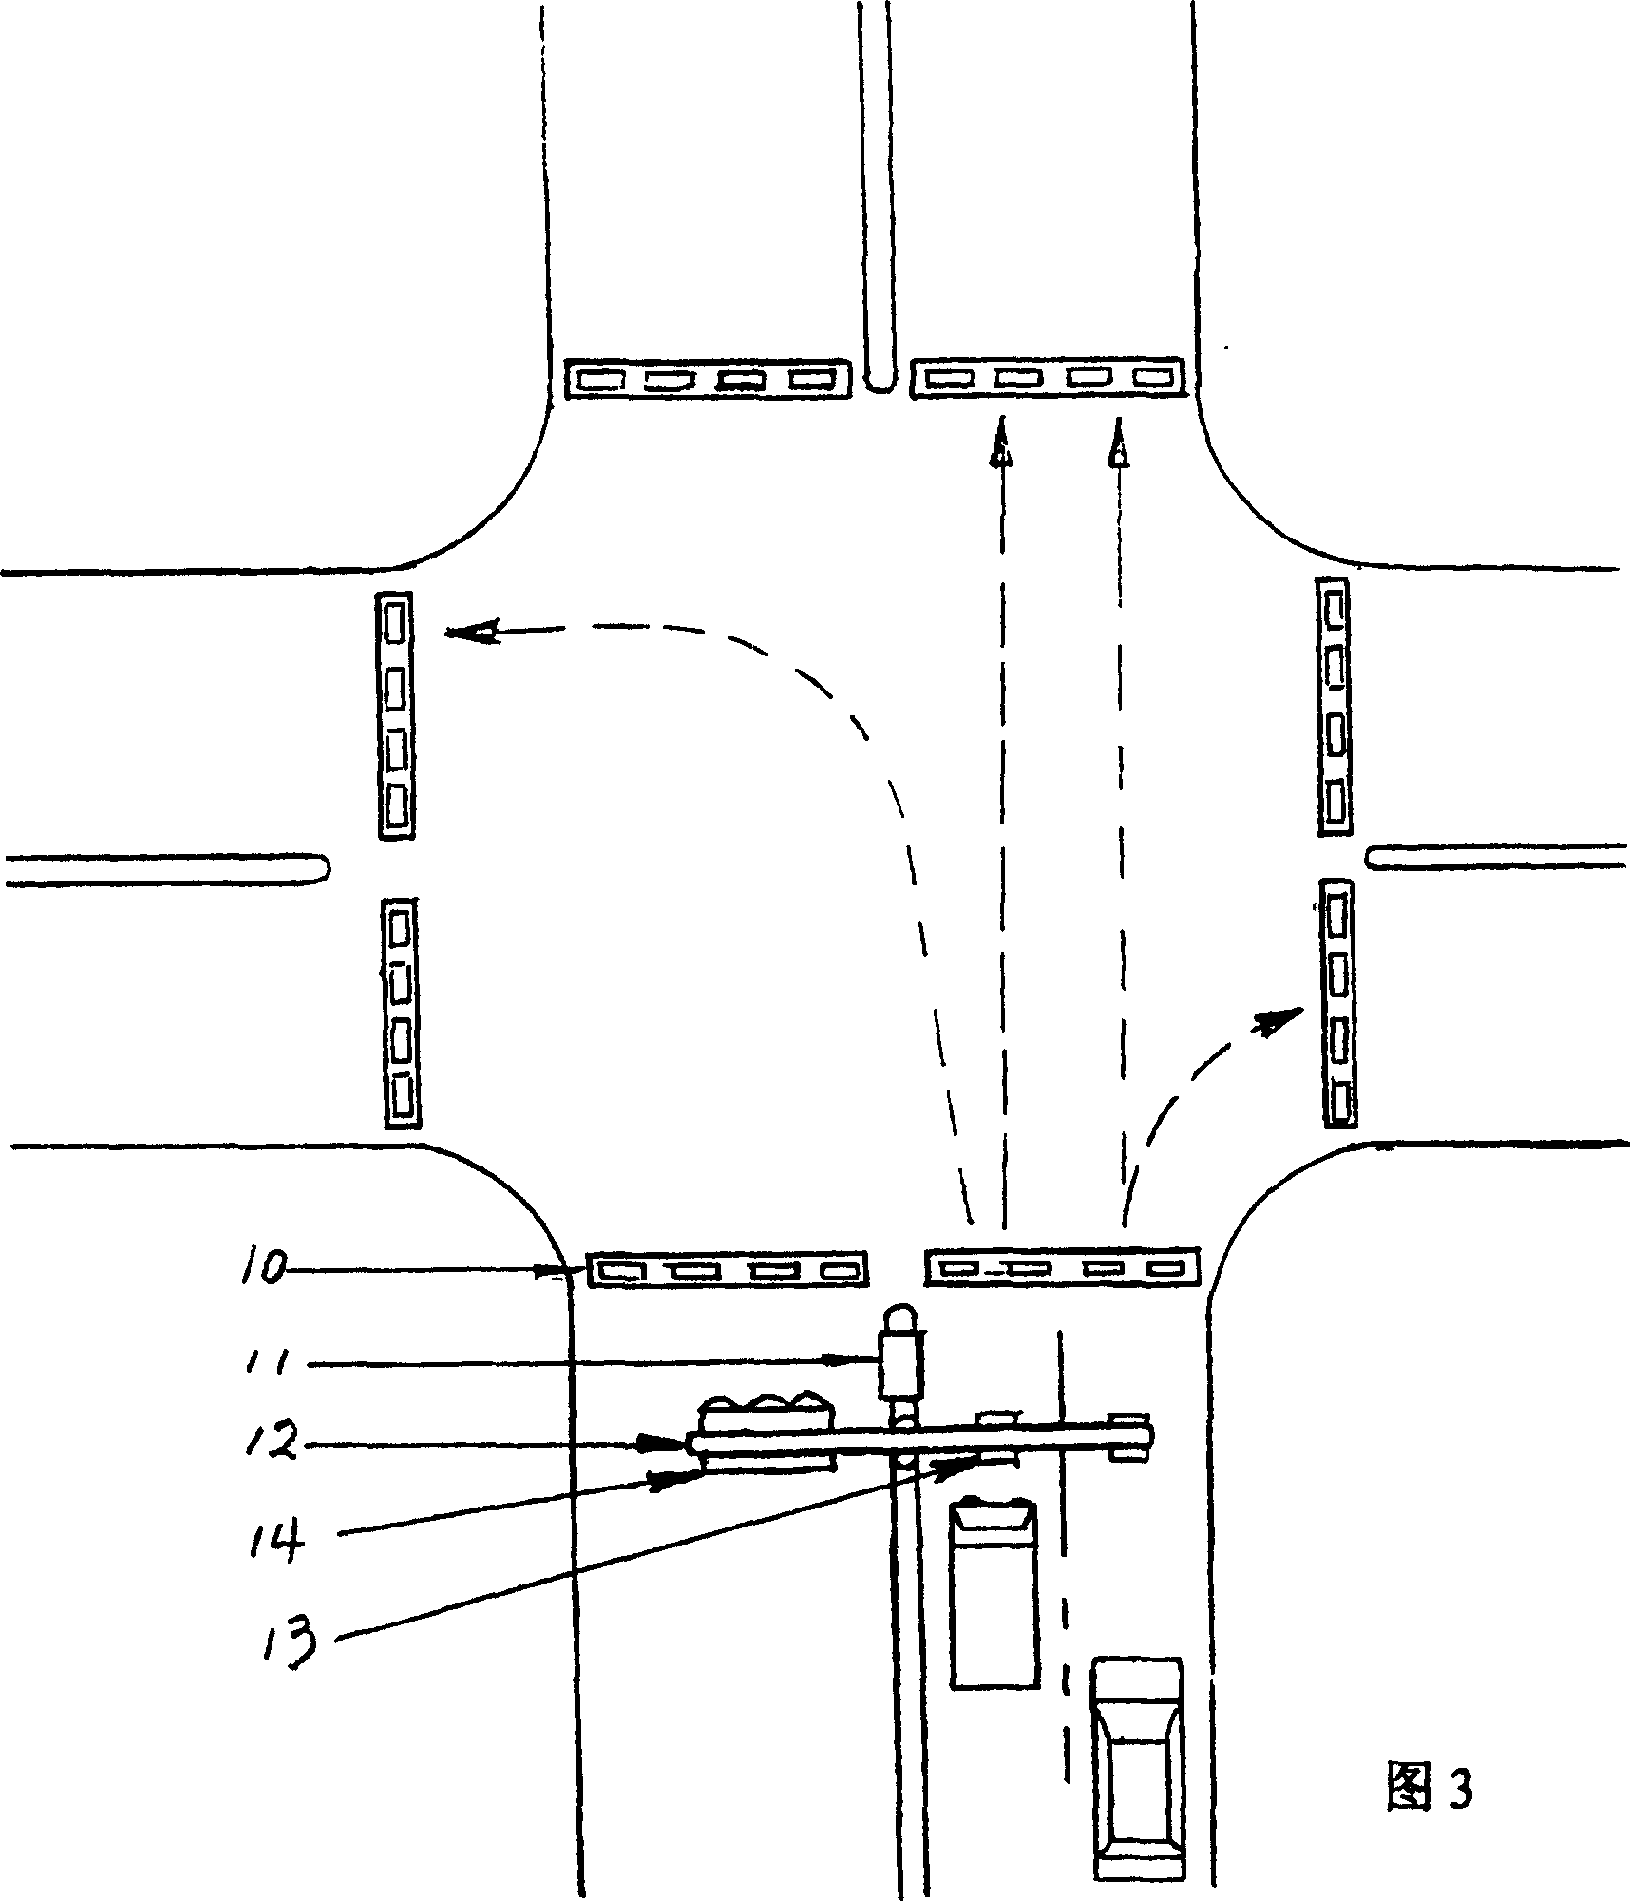 Traffic controlling system with microwave communicating apparatus